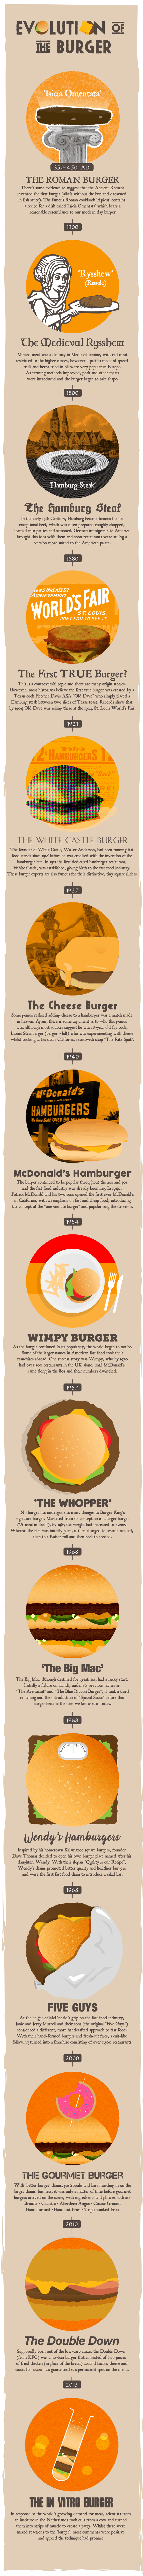 illustrated history of the burger